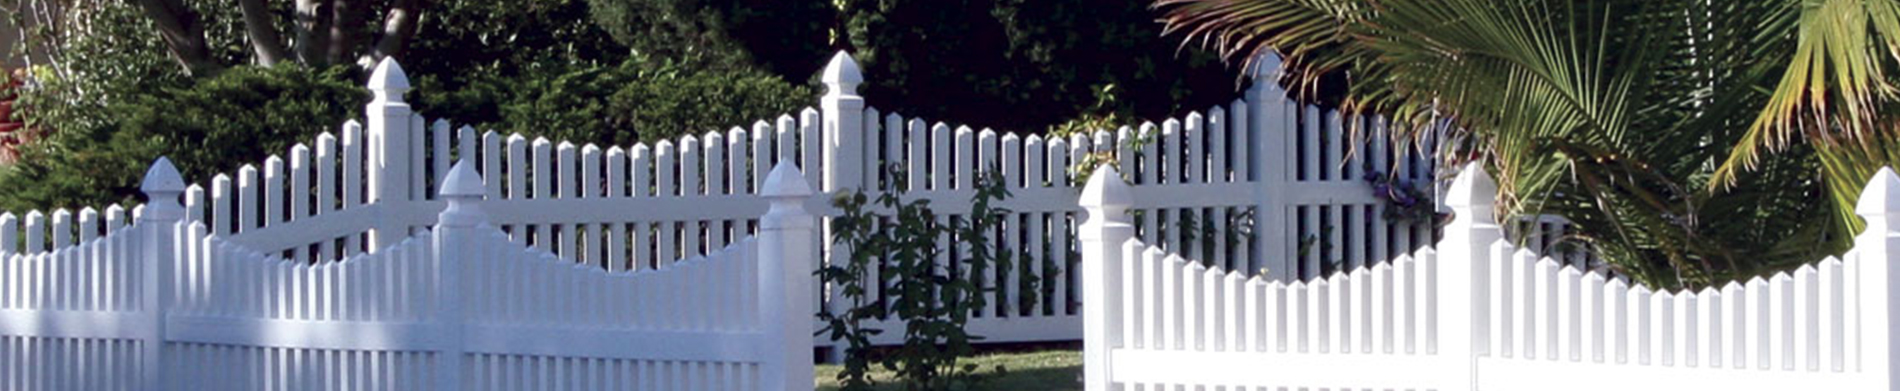 Enhance the Beauty of Your Yard with Traditional Vinyl Fencing from Duramax